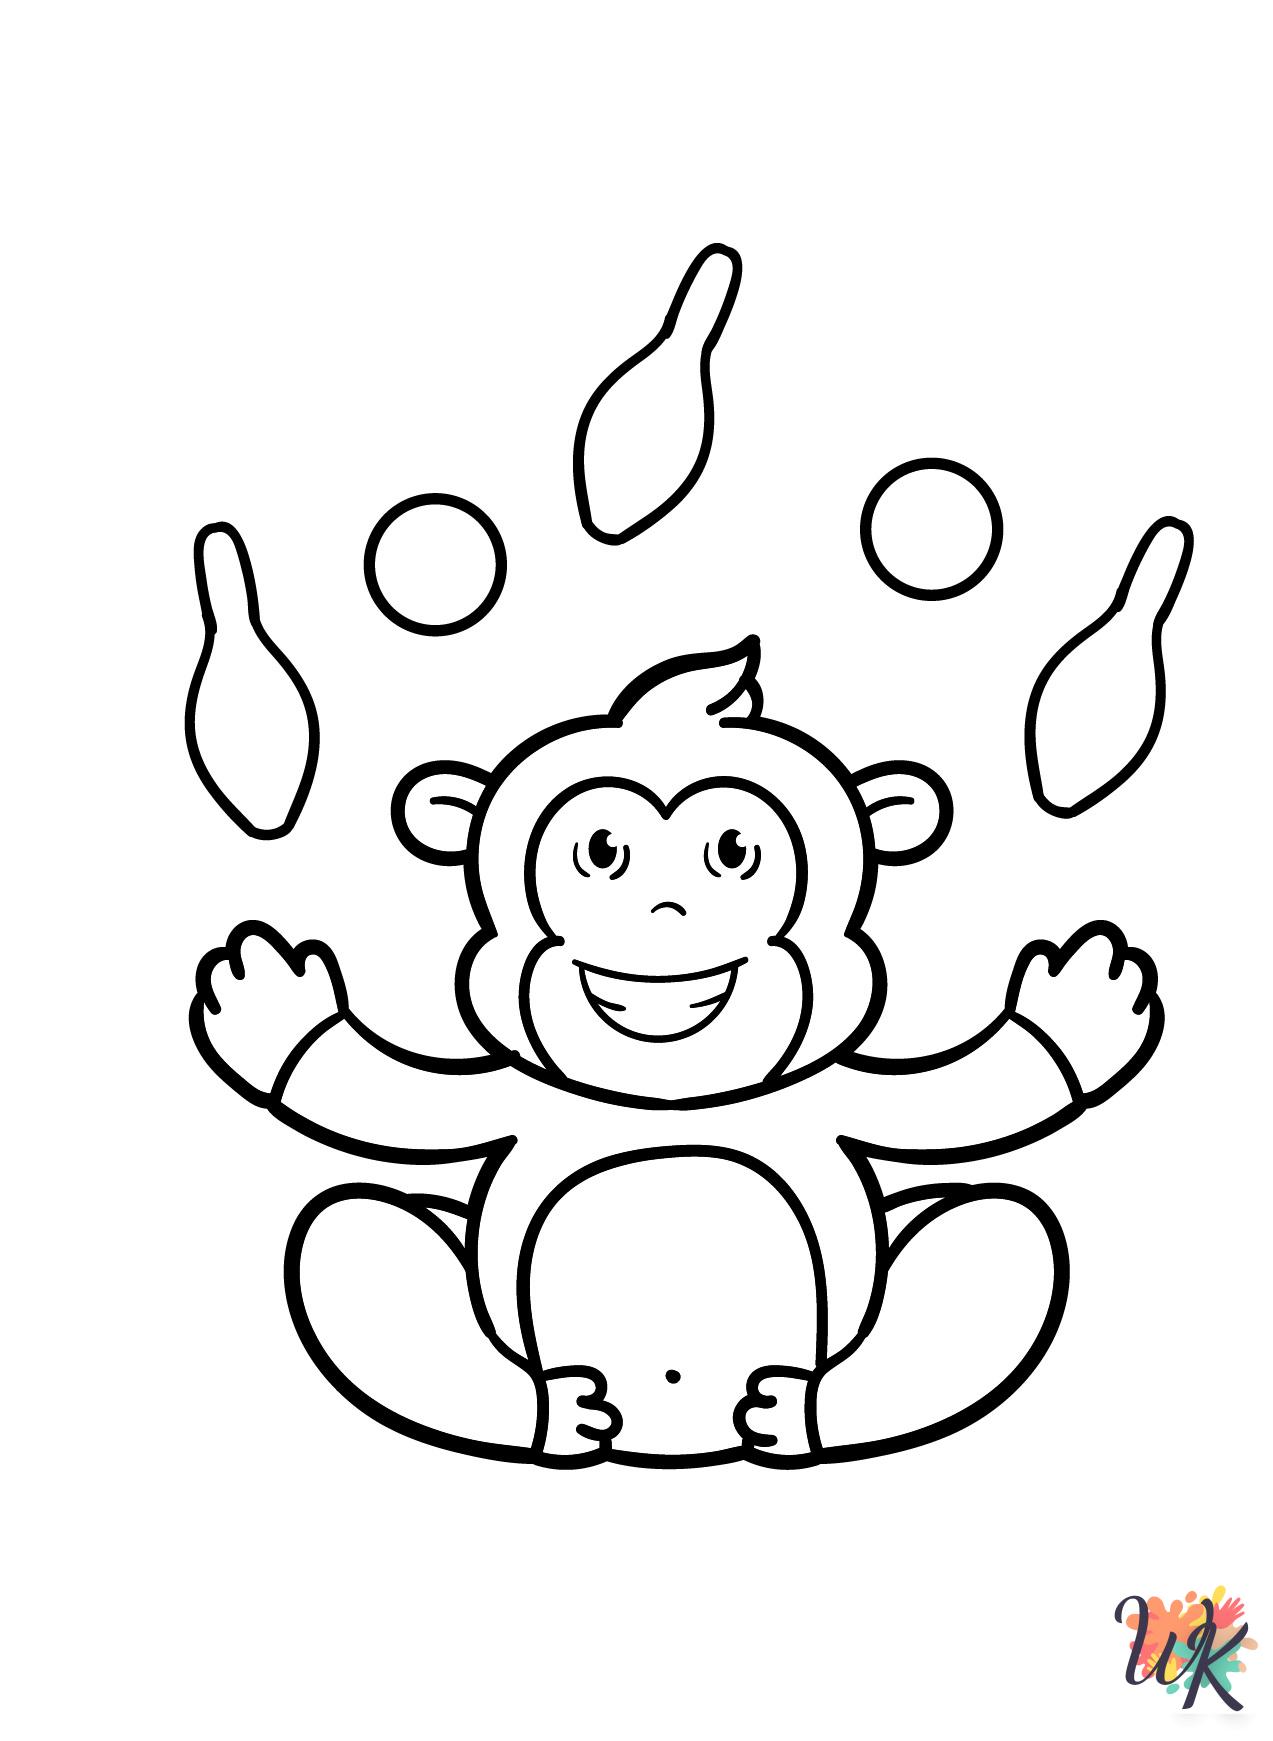 Circus coloring book pages